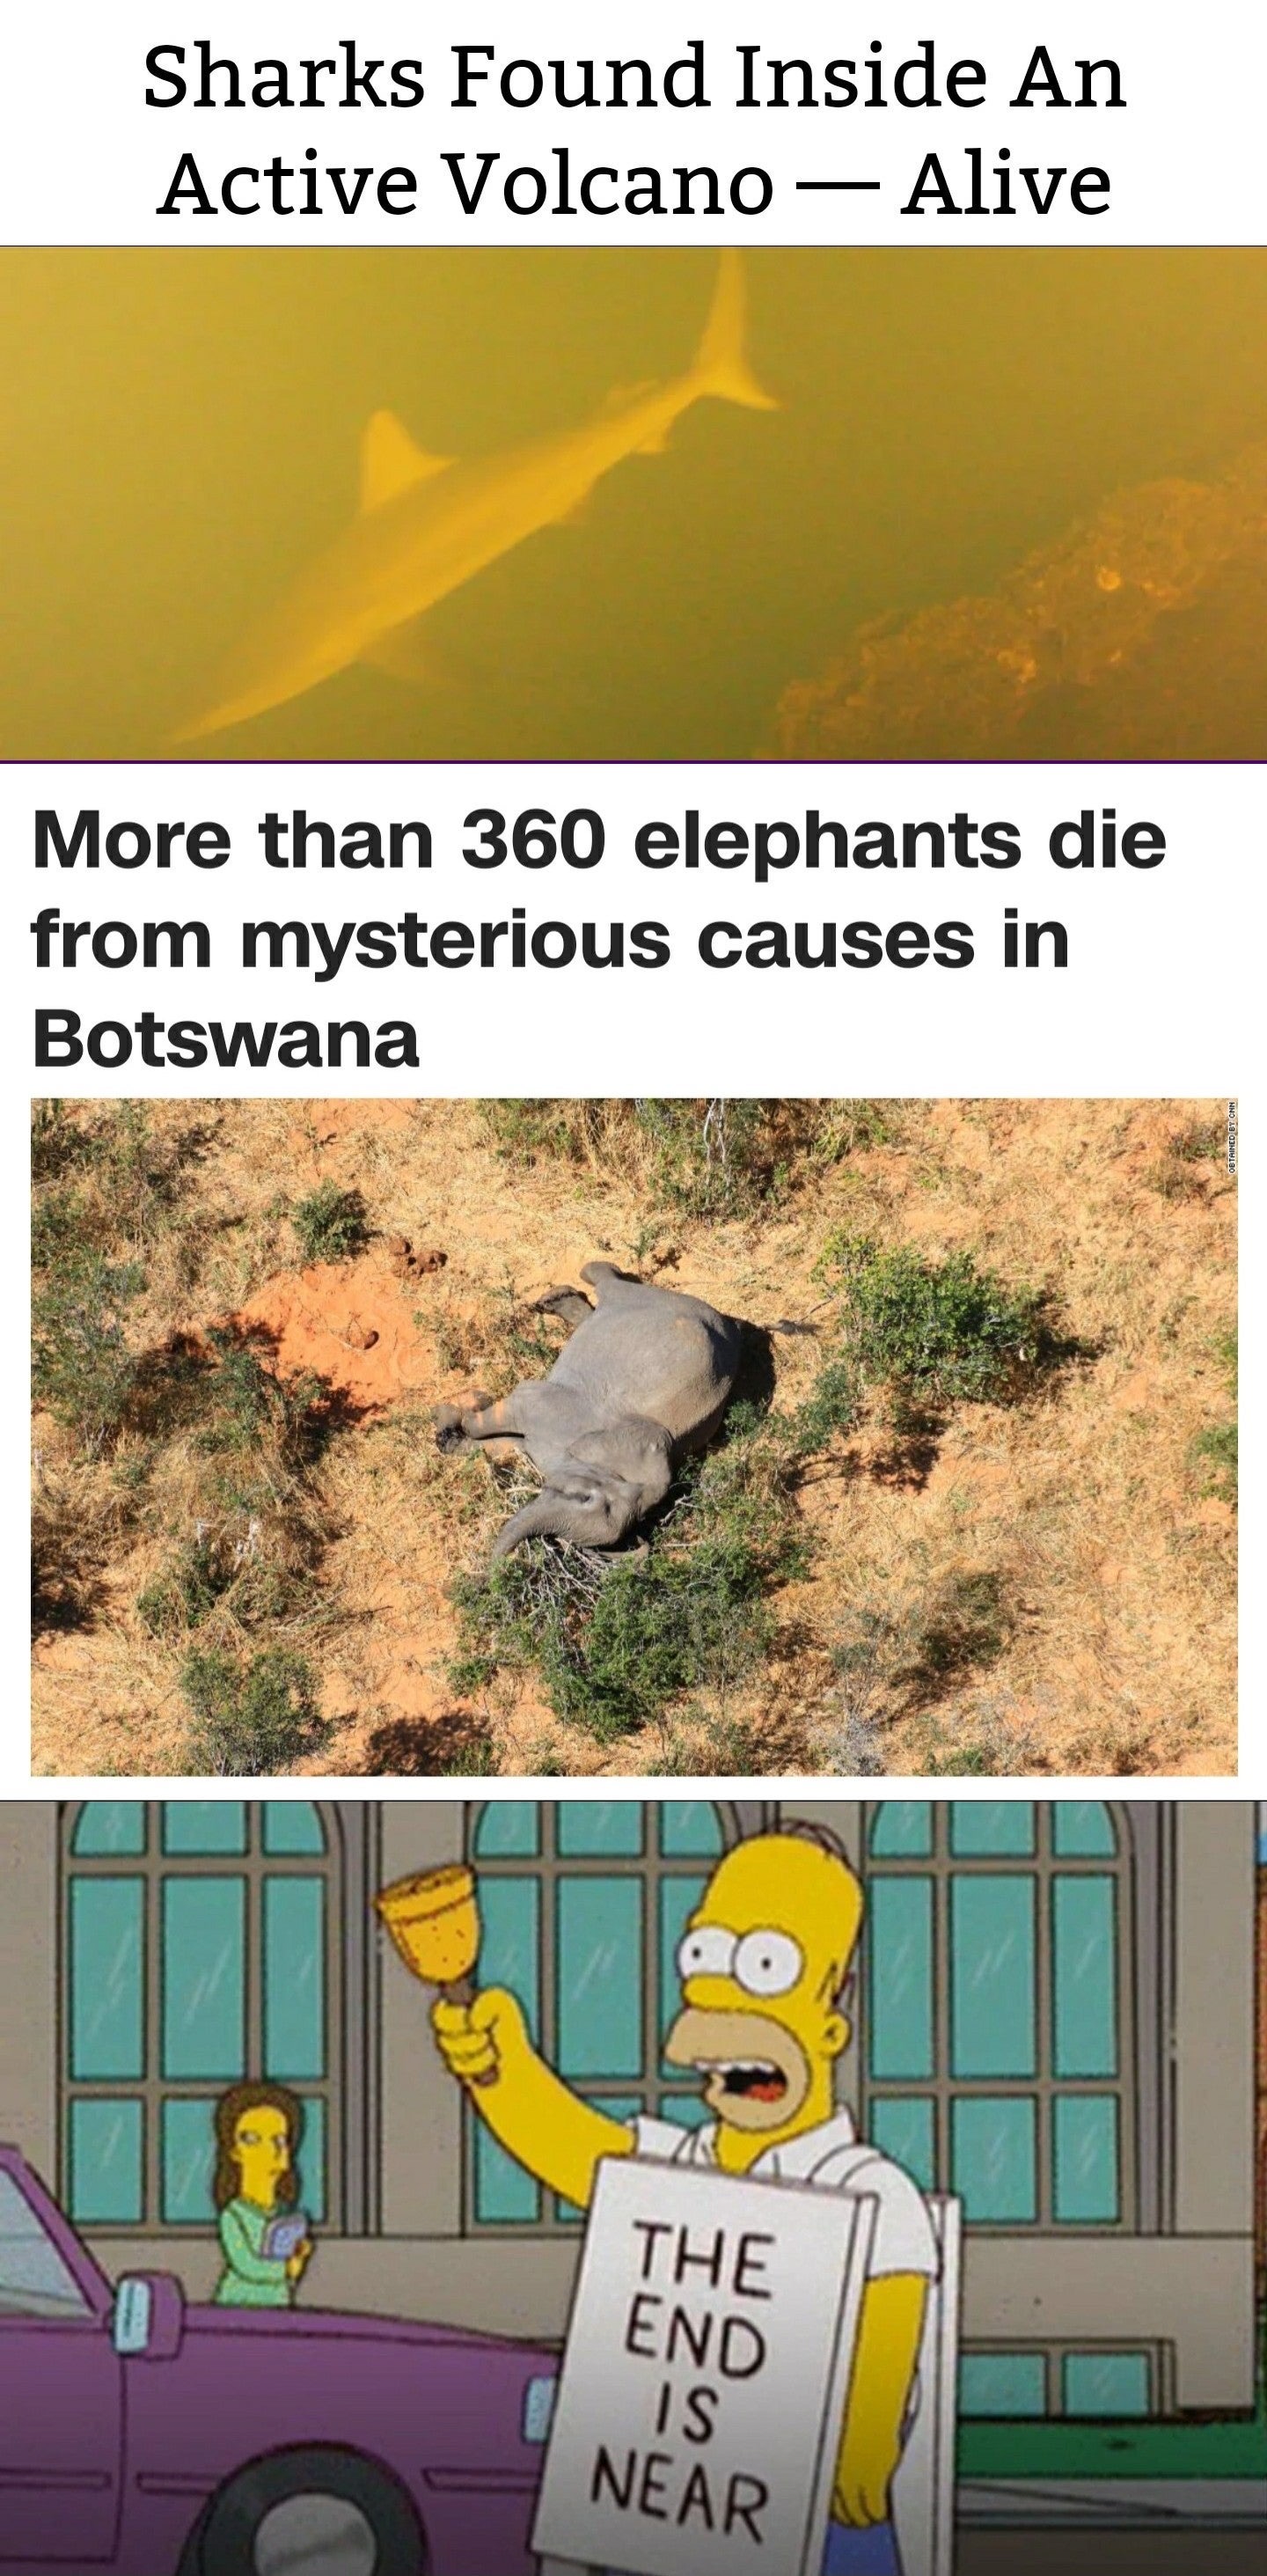 Sharks Found Inside An Active Volcano Alive More than 360 elephants die from mysterious causes in Botswana .. The End Is Near